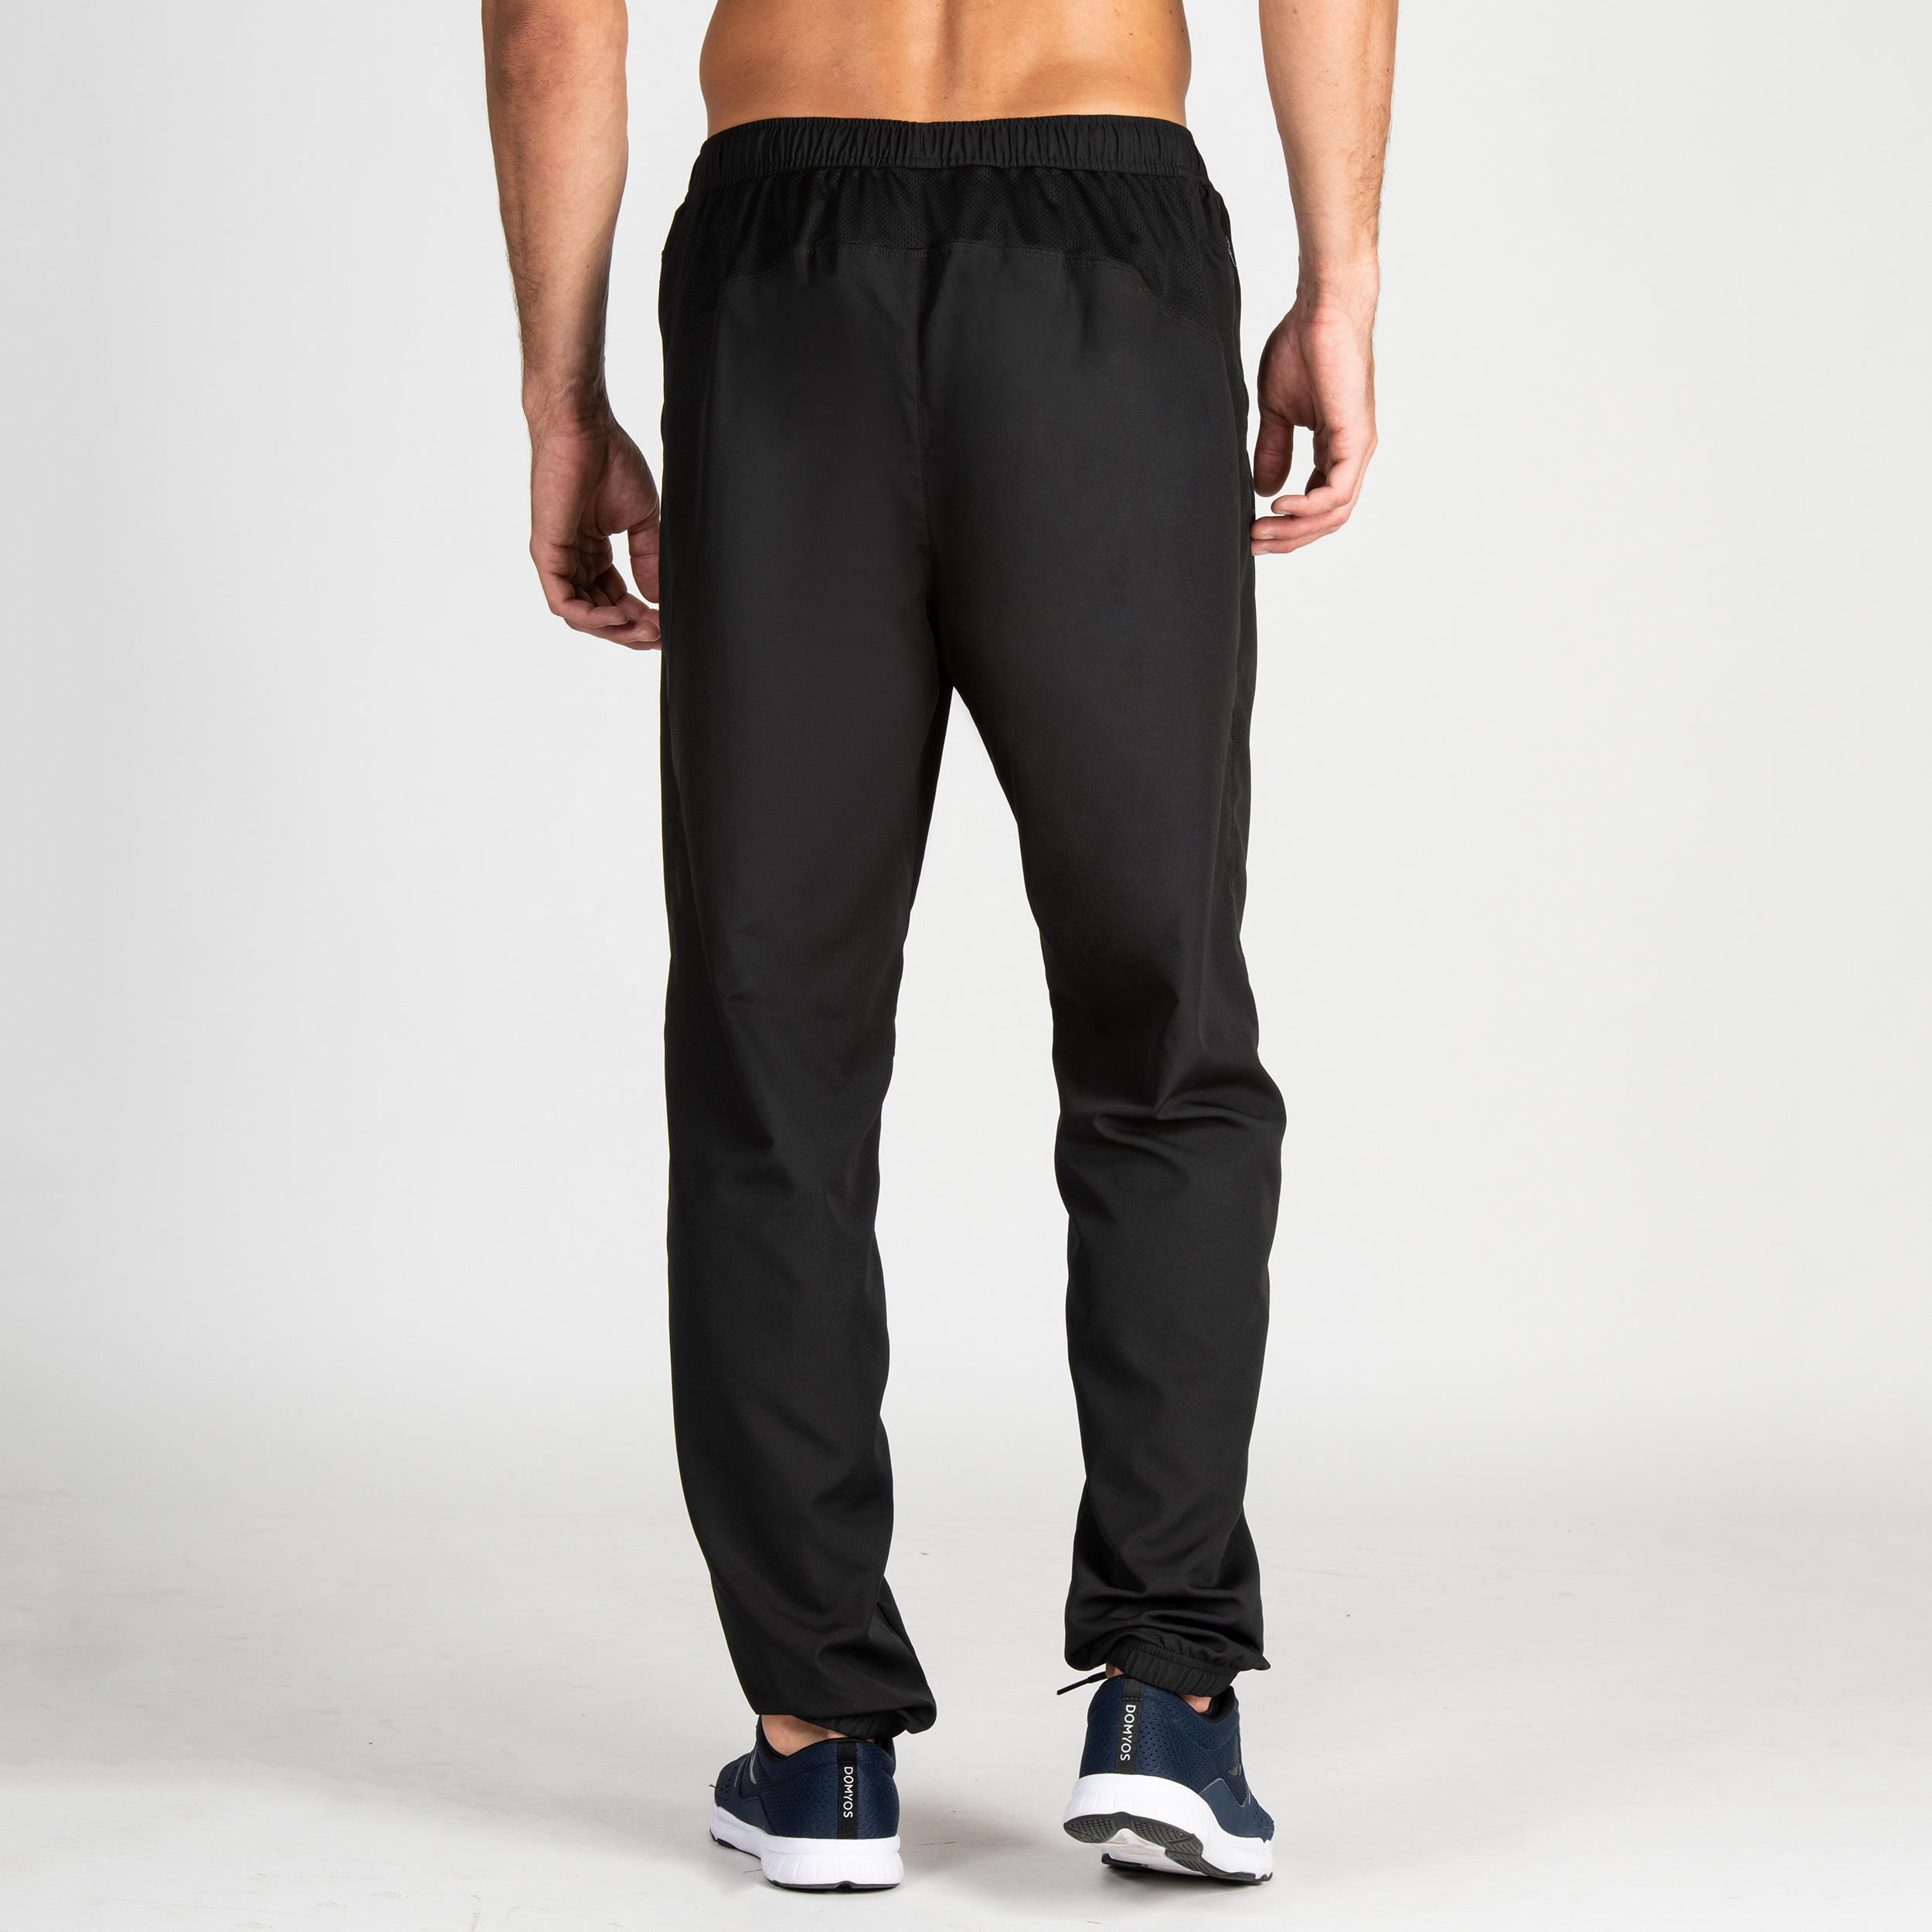 QUECHUA by Decathlon Relaxed Men Grey Trousers - Buy QUECHUA by Decathlon  Relaxed Men Grey Trousers Online at Best Prices in India | Flipkart.com